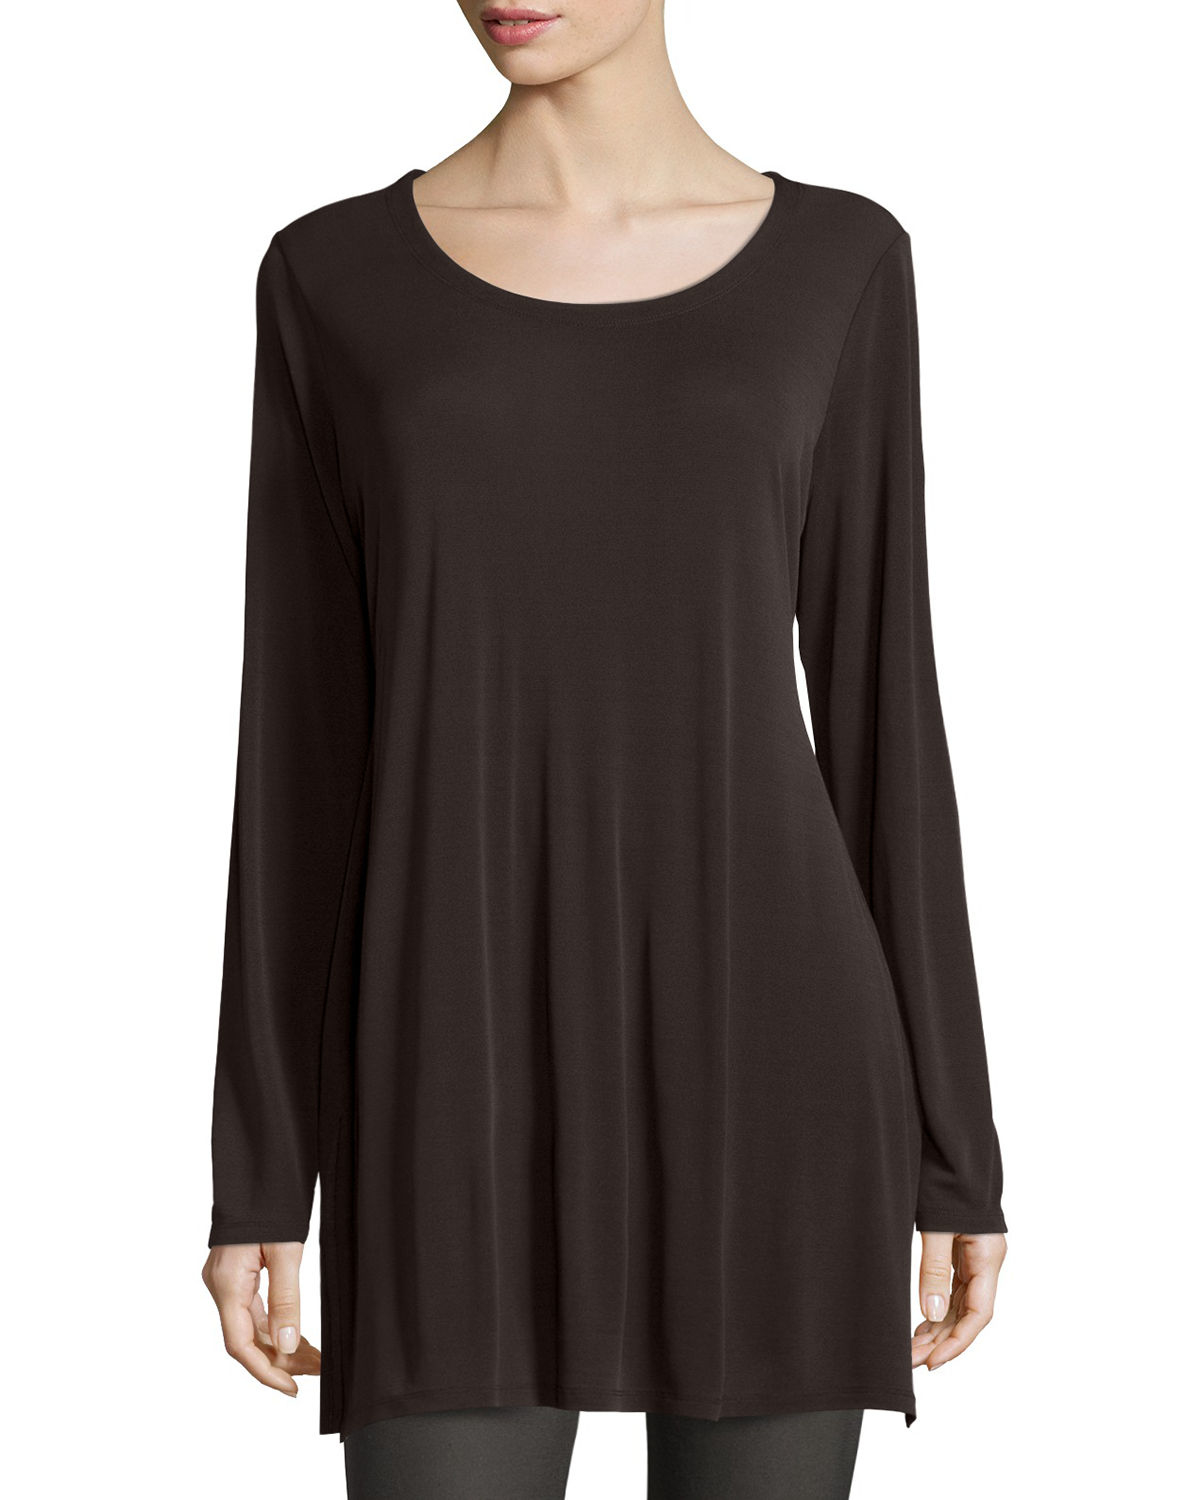 Eileen fisher Silk Jersey Long-sleeve Tunic in Brown (CHOCOLATE) - Save ...